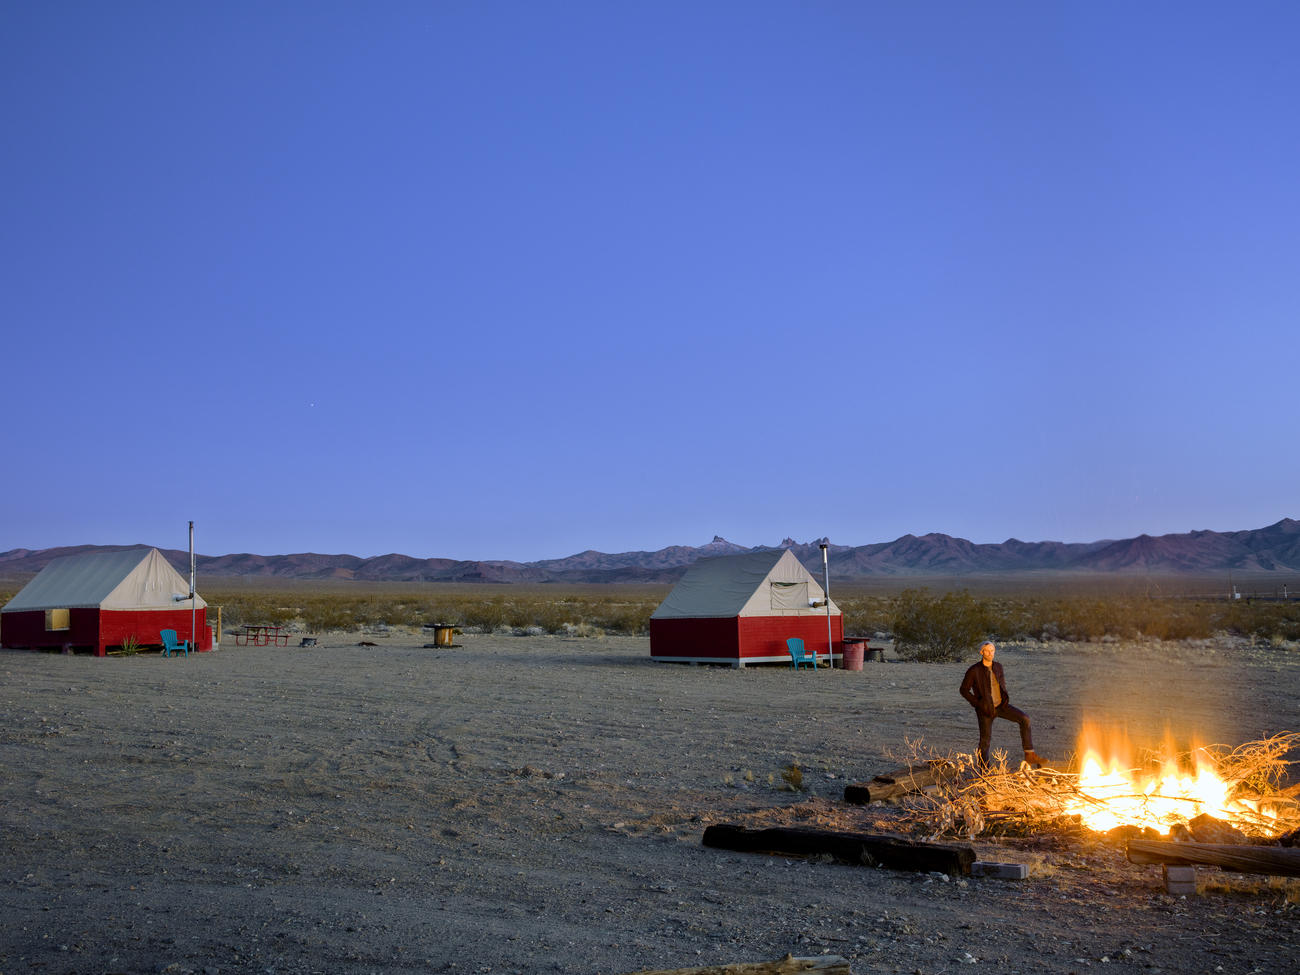 Got $5 Million? You Could Own This Sustainable “Ghost Town” in the Mojave Desert